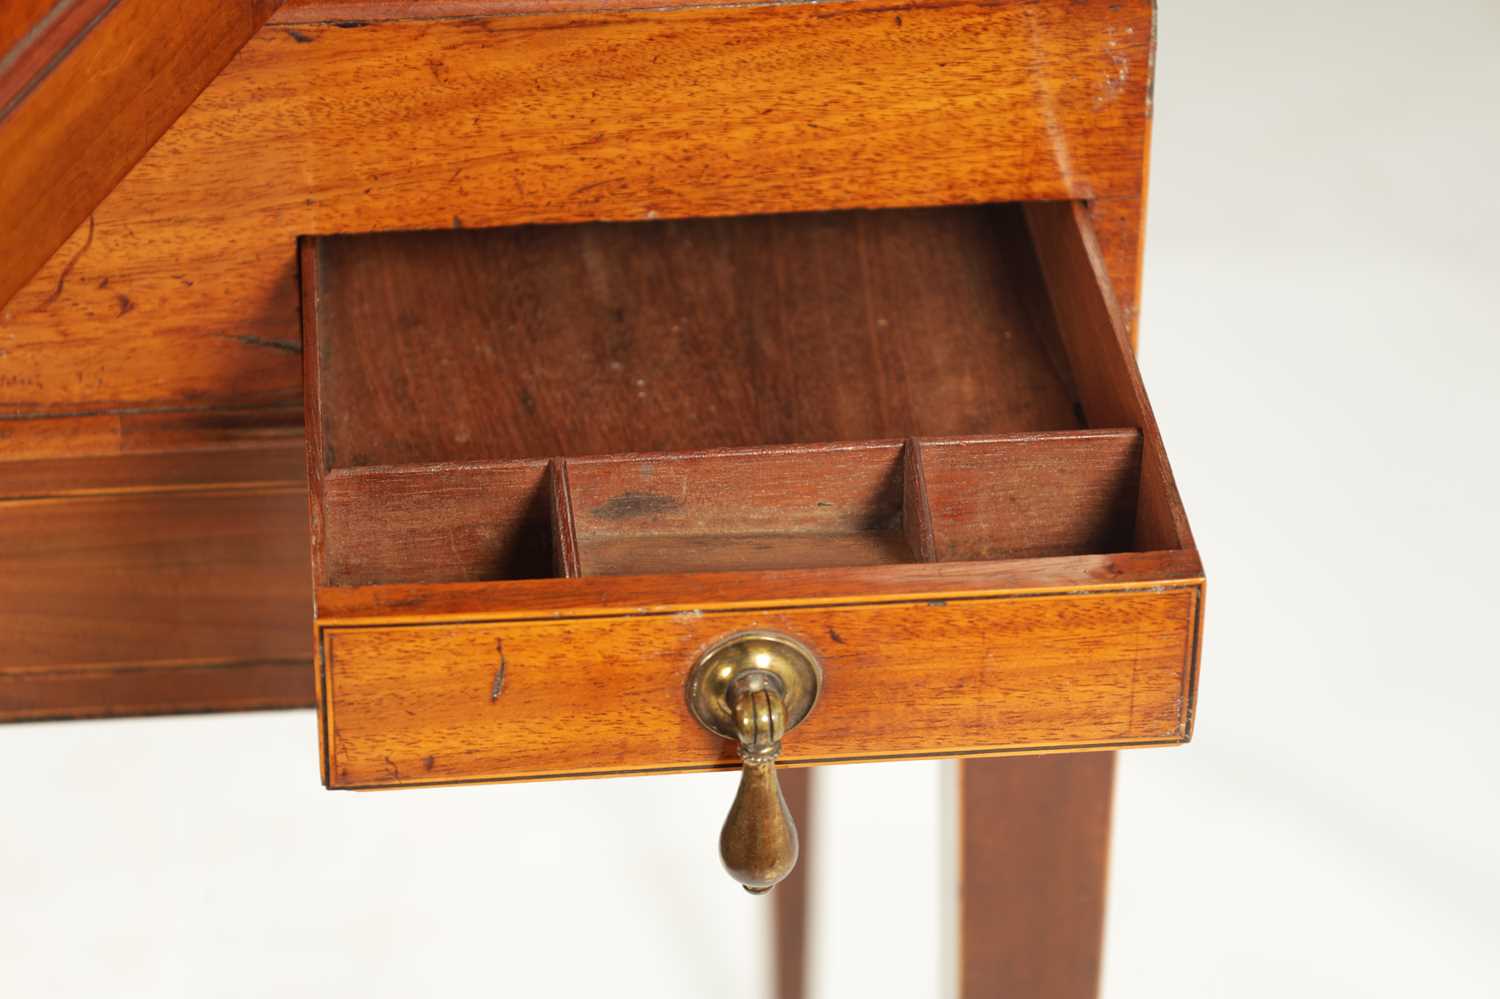 A SMALL LATE 18TH CENTURY FIGURED ROSEWOOD AND TULIPWOOD BANDED BONHEUR DE JOUR - Image 6 of 6